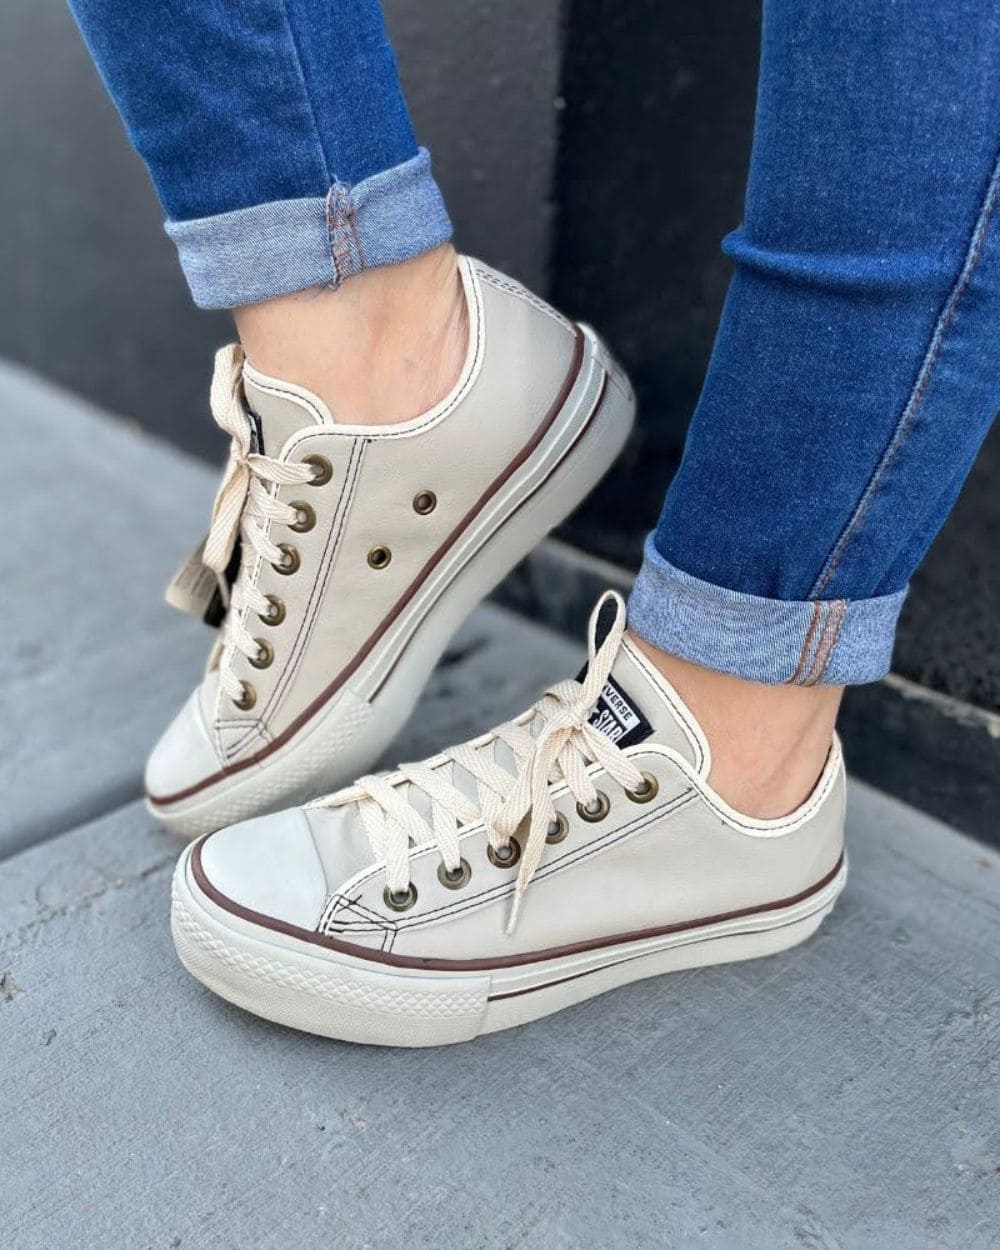 Converse All Star Plataforma Bege Couro, all star bege - thirstymag.com